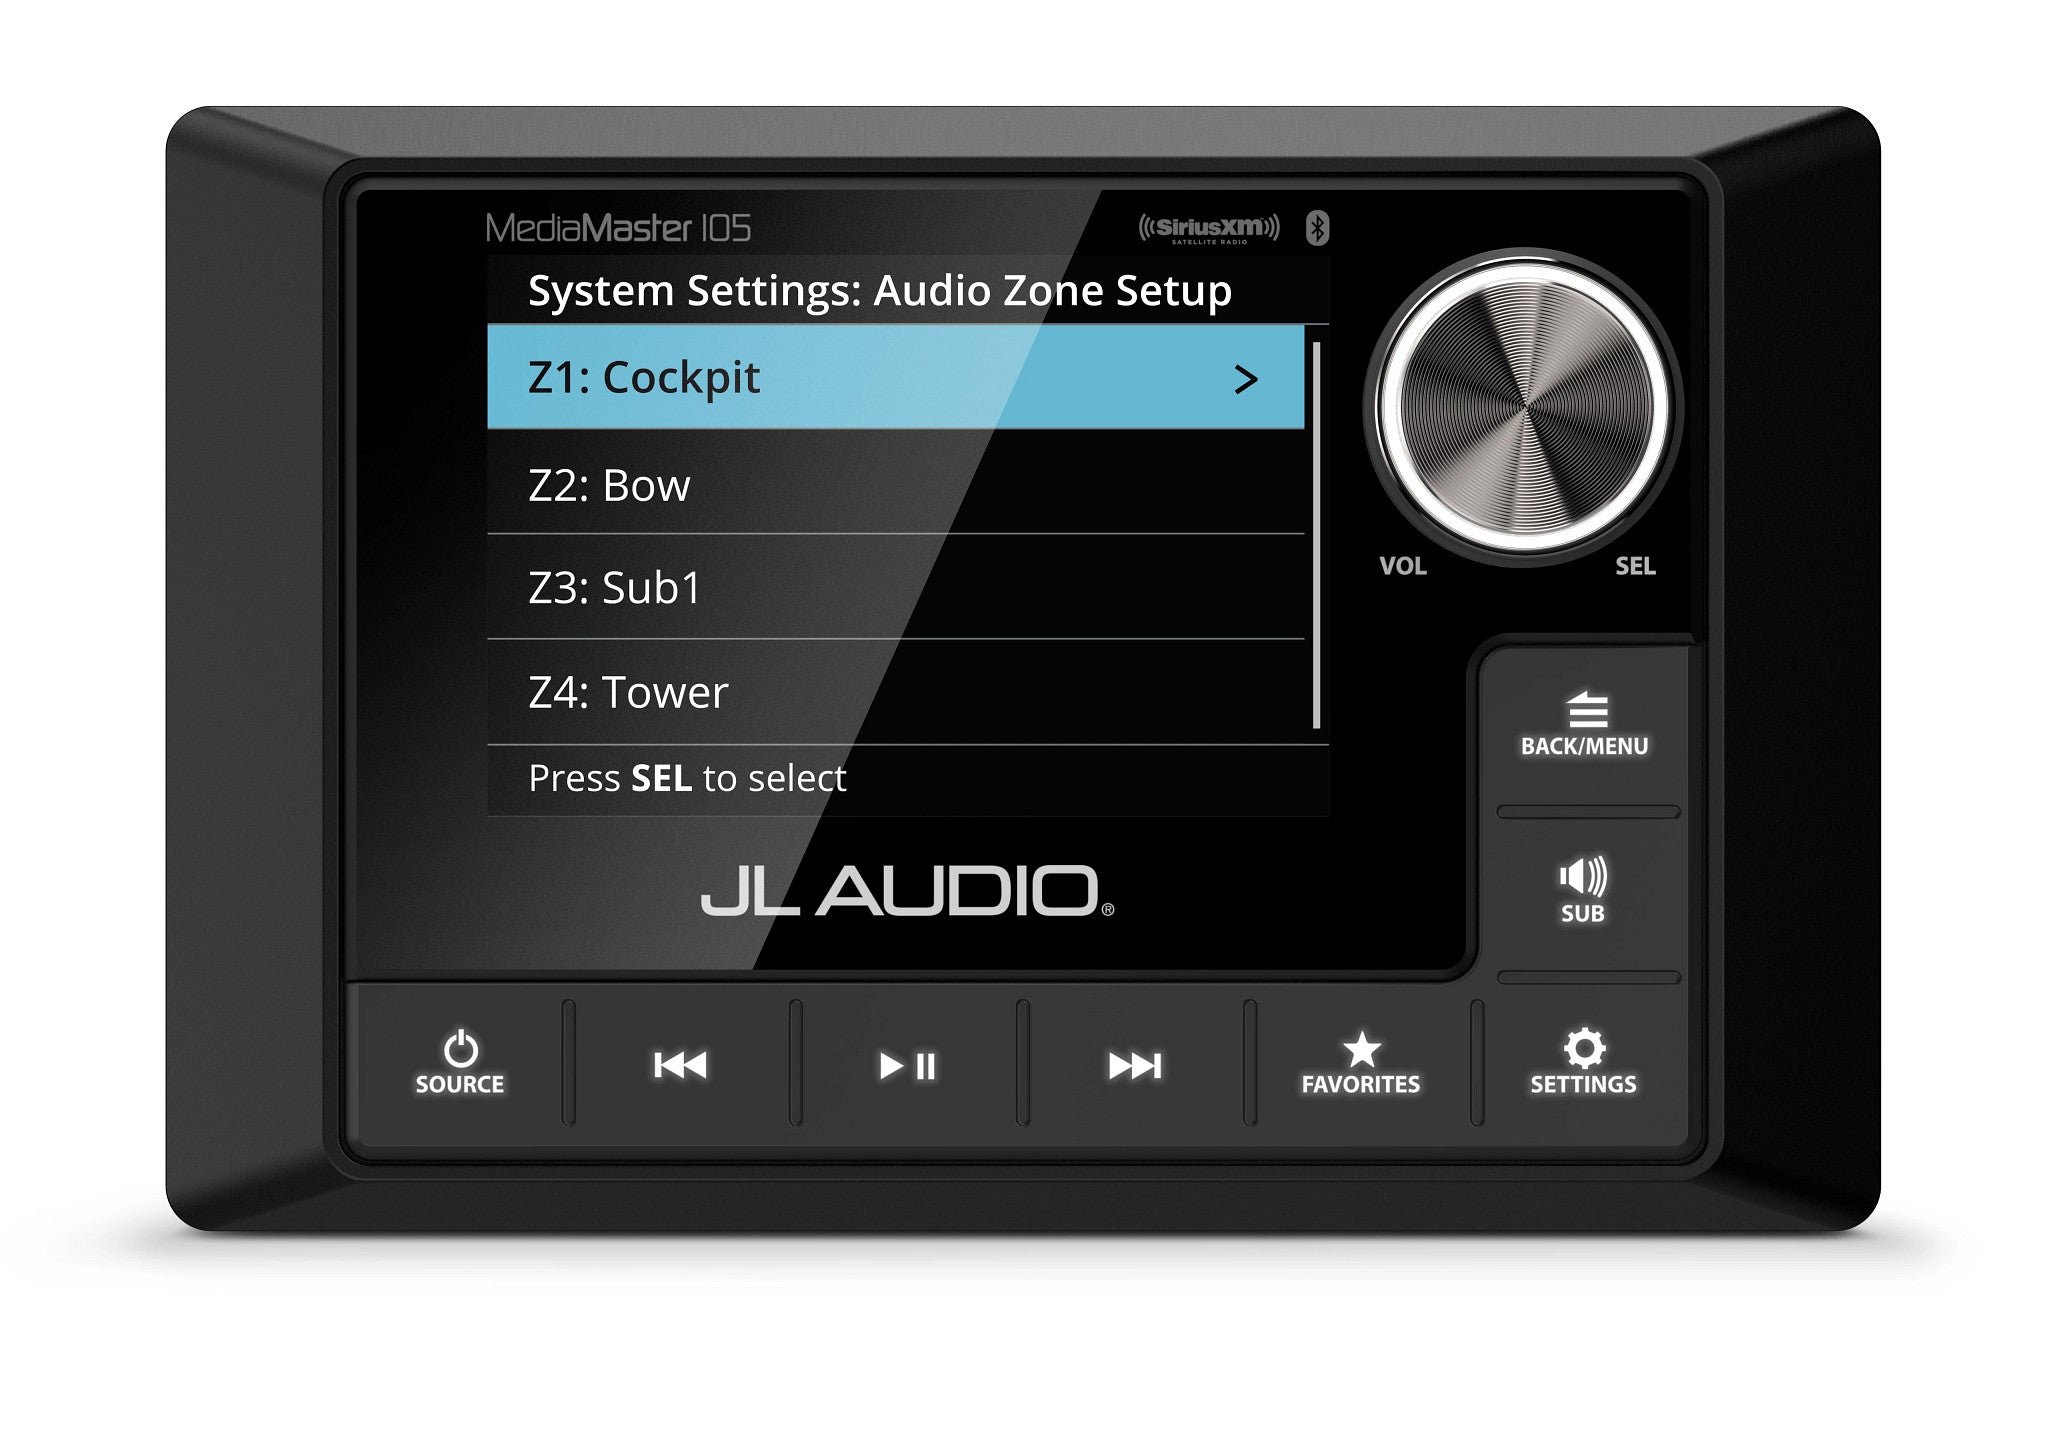 MediaMaster MM105 Front Overhead with System Settings screen adjusting Audio Zone Setup for Zone 1